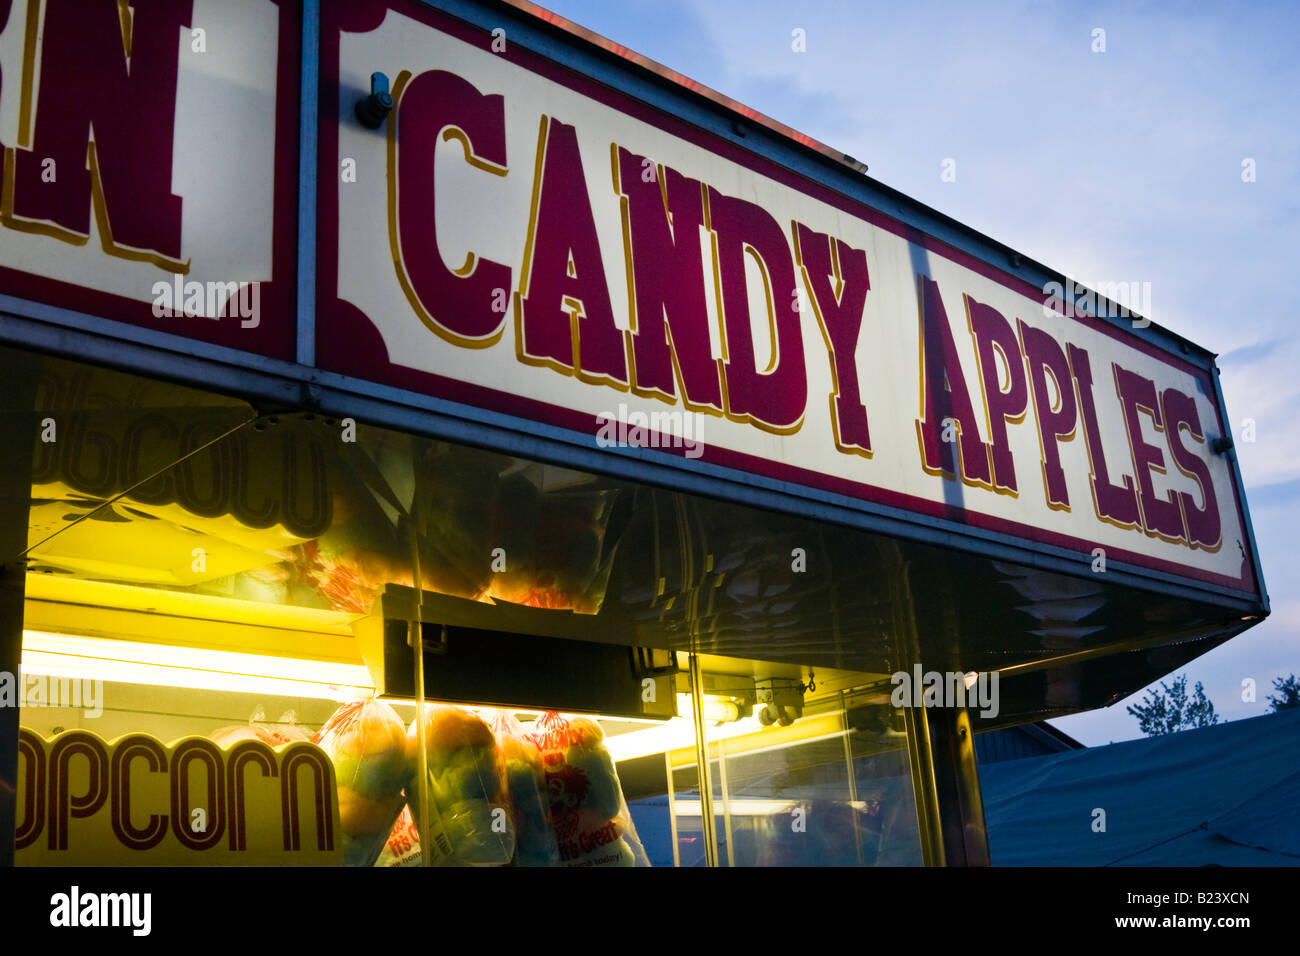 Concession stand with candy apples and popcorn at county fair Stock Photo